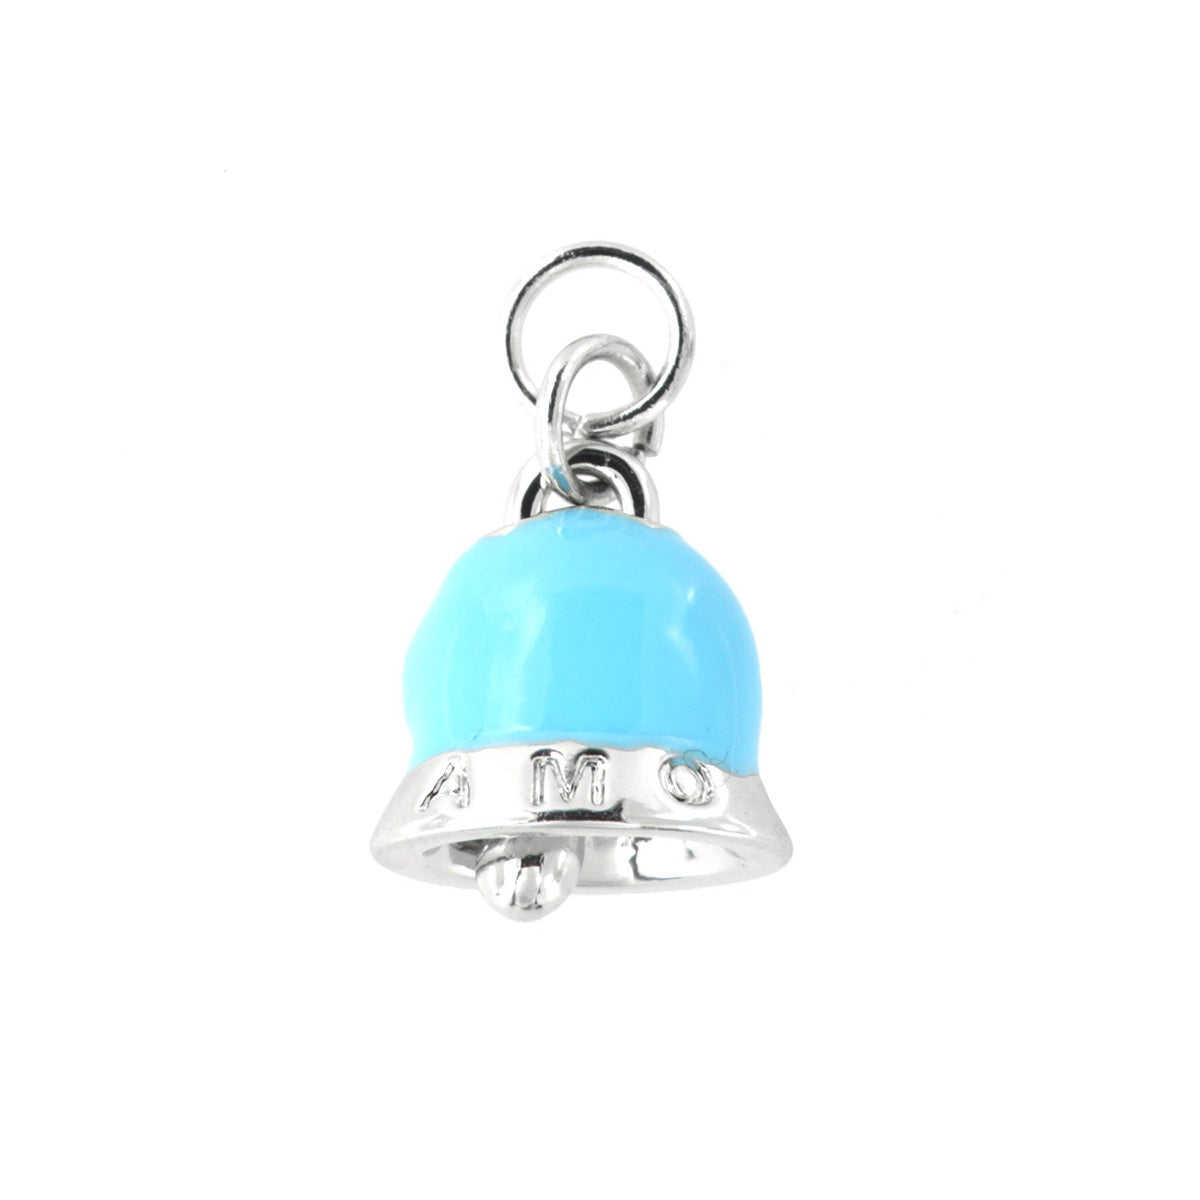 Metal pendant charming bell embellished with turquoise enamel